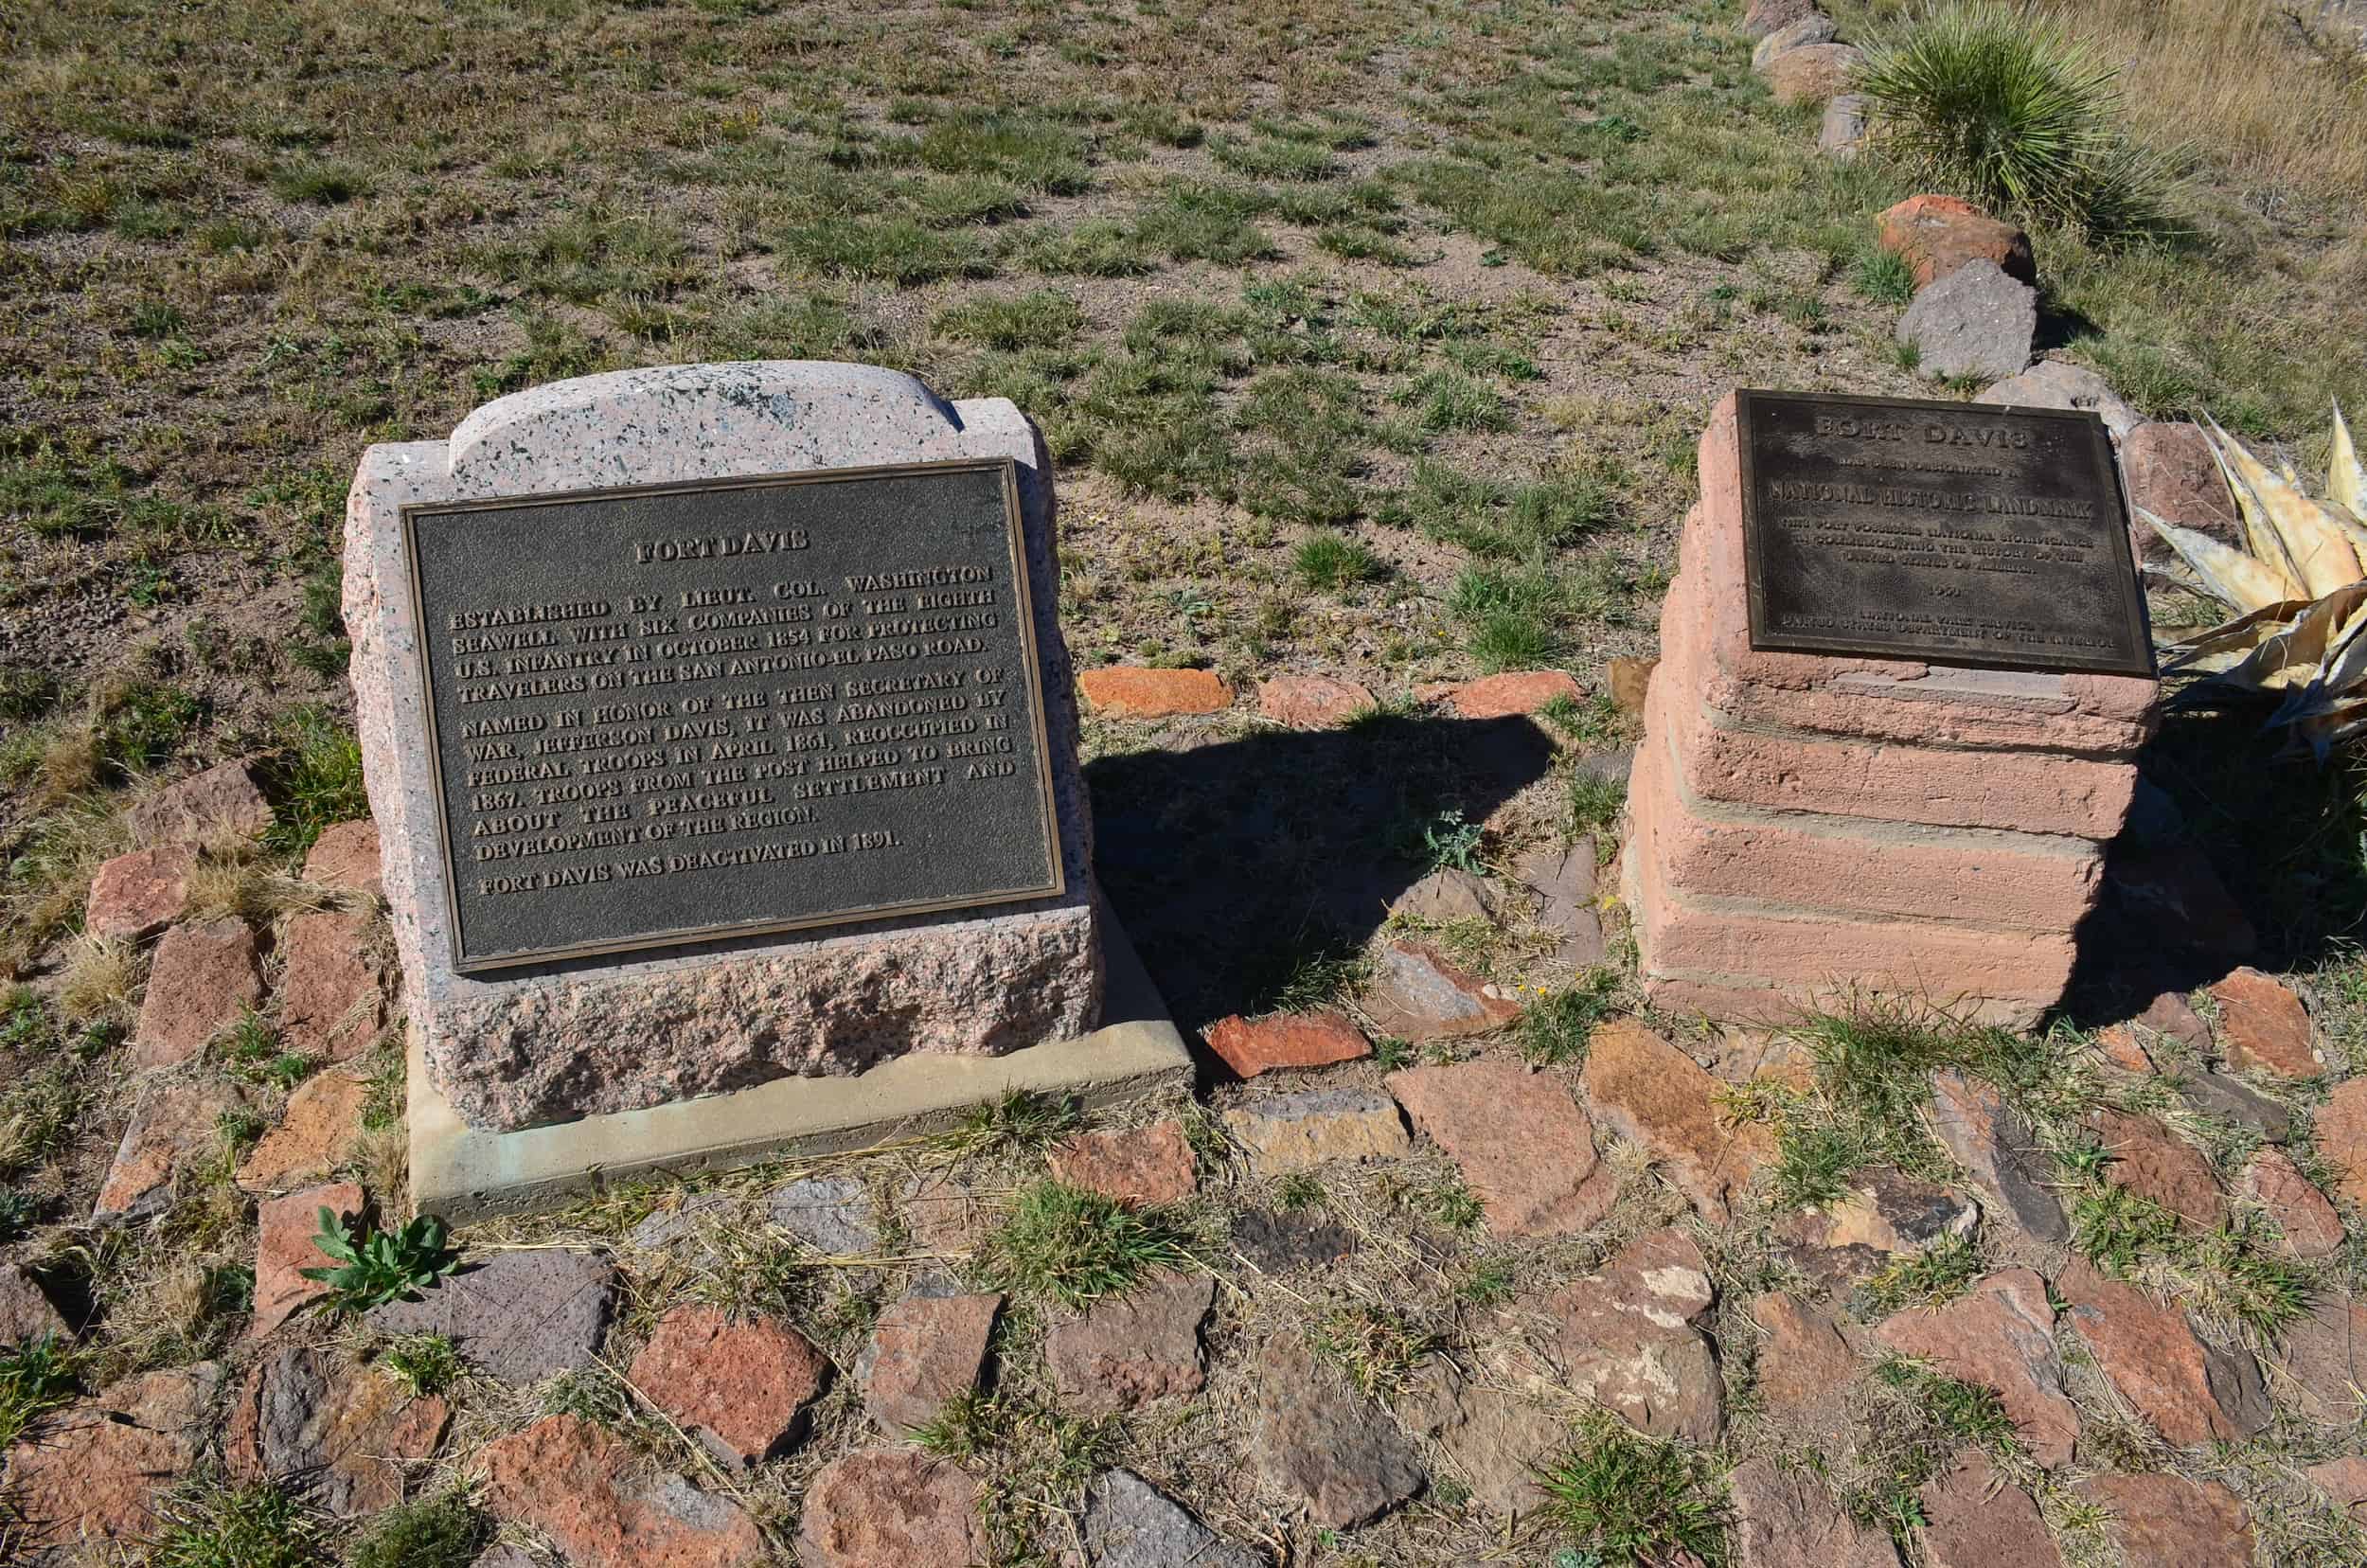 Historical markers